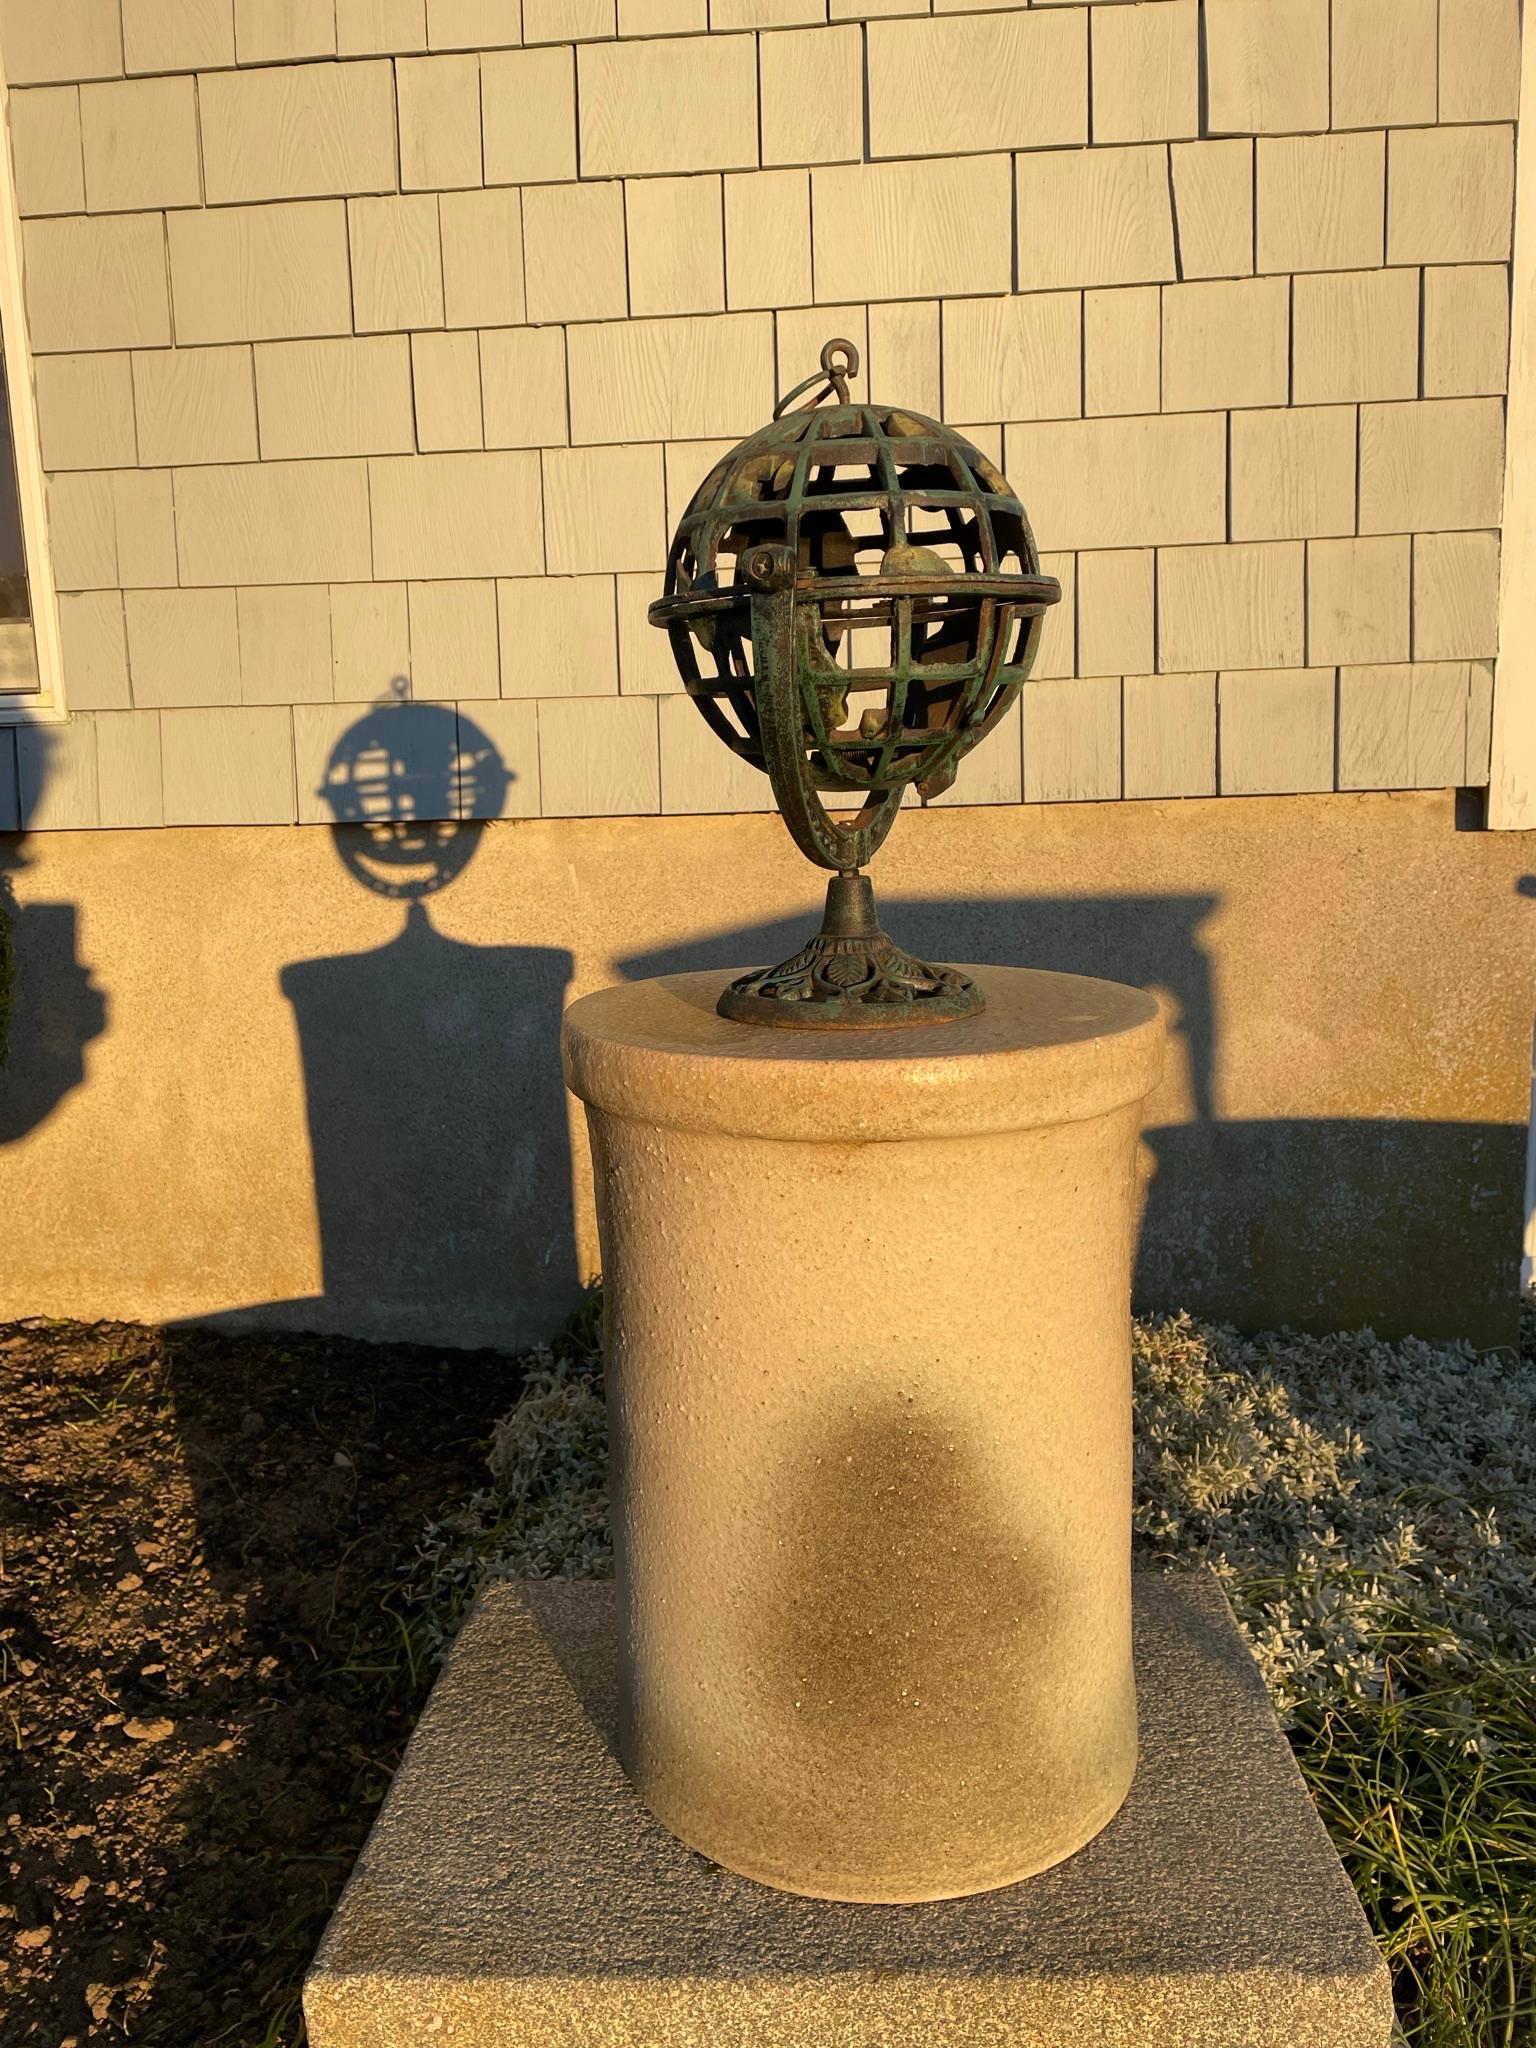 Hand-Crafted Japanese Old Unique Five Continents Globe Lighting Lantern